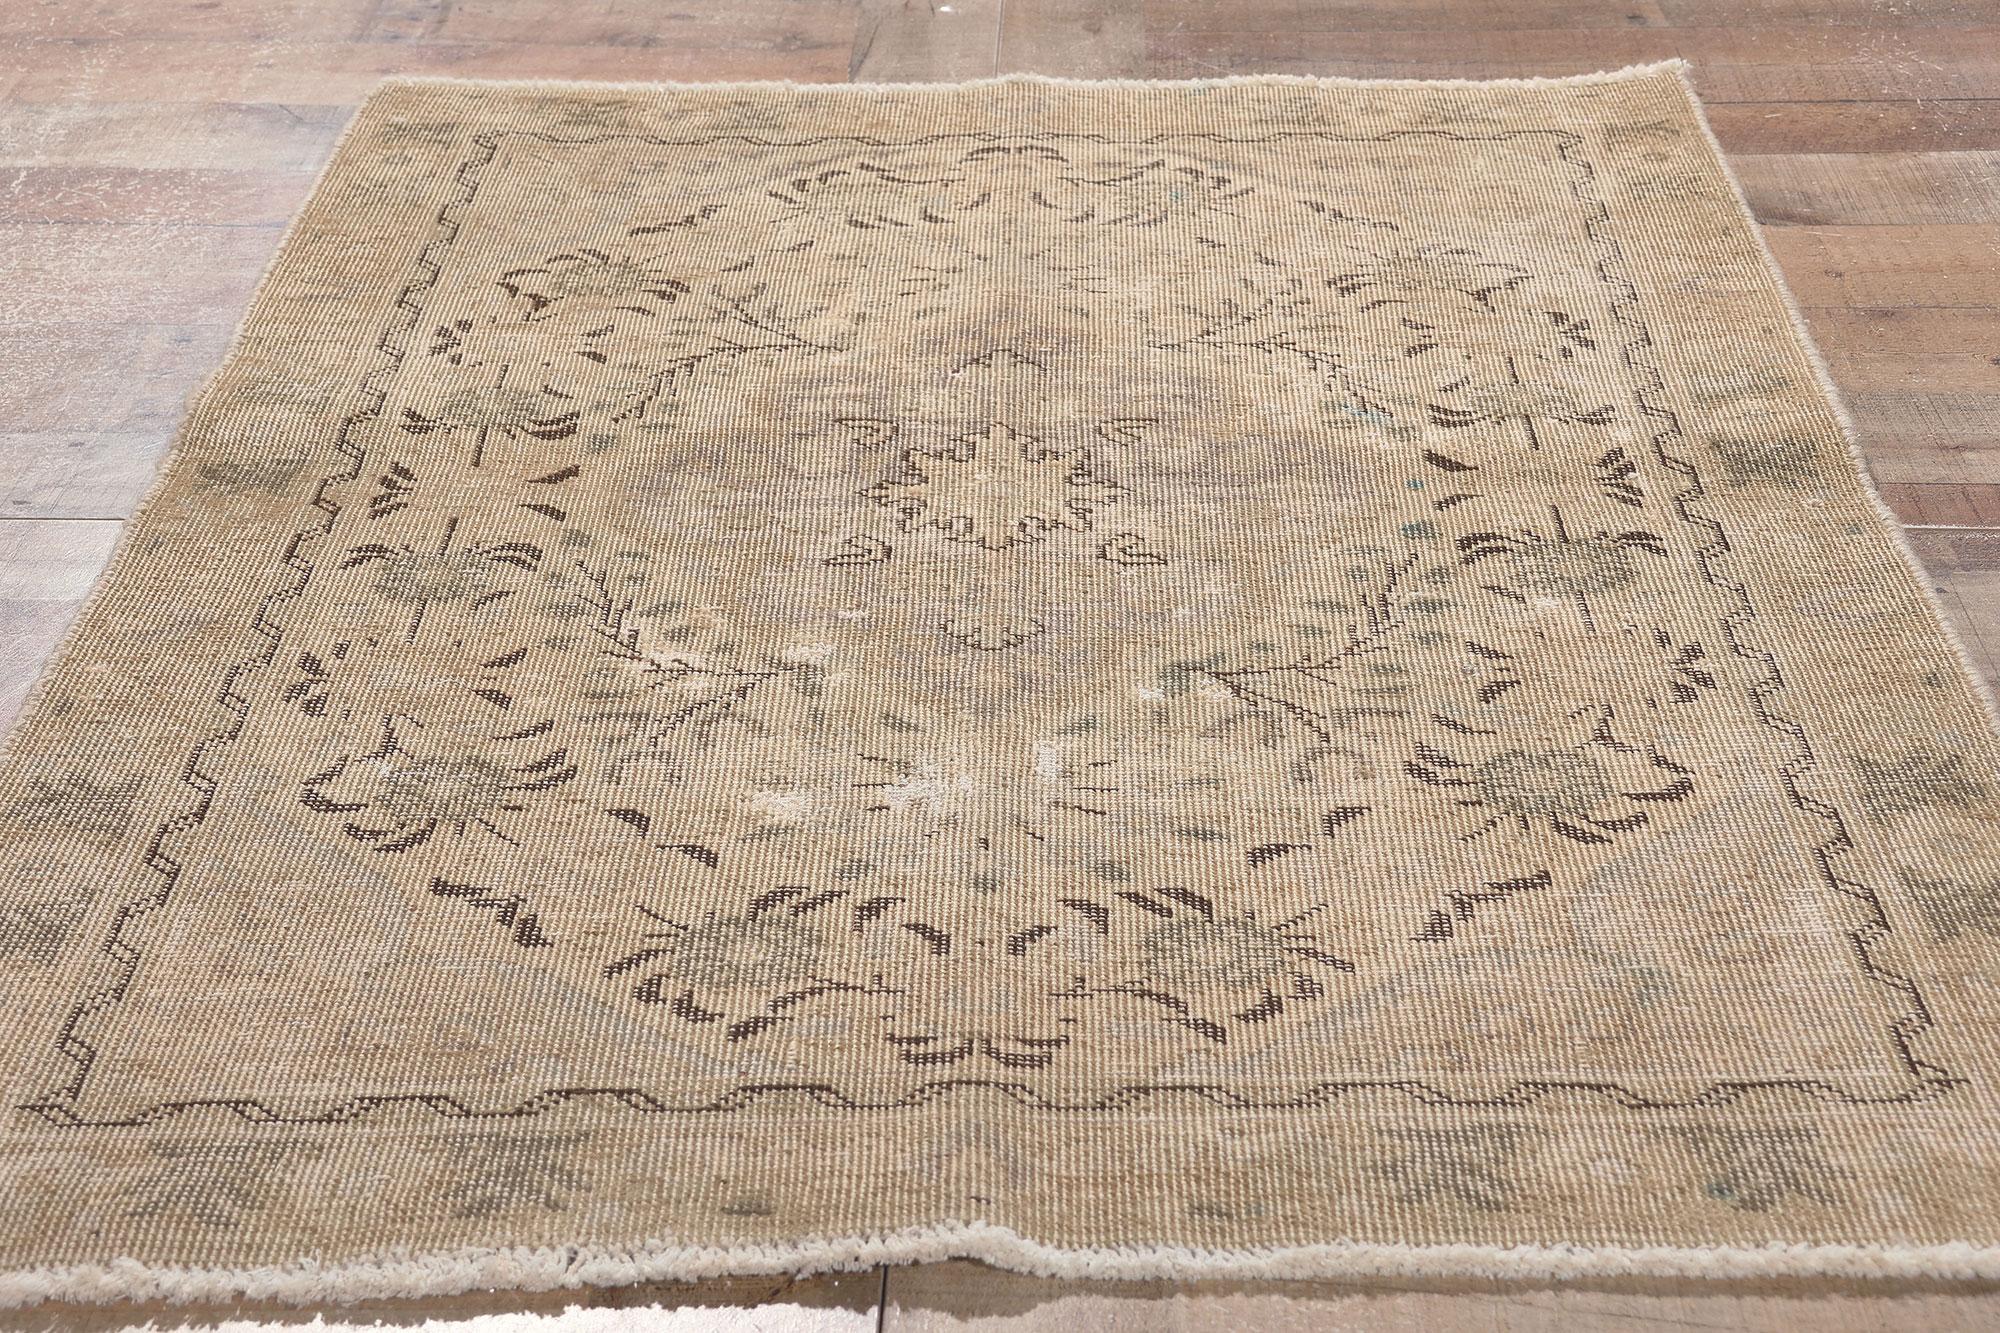 20th Century Rustic Vintage Persian Tabriz Rug Warm Neutral Earth-Tone Colors For Sale